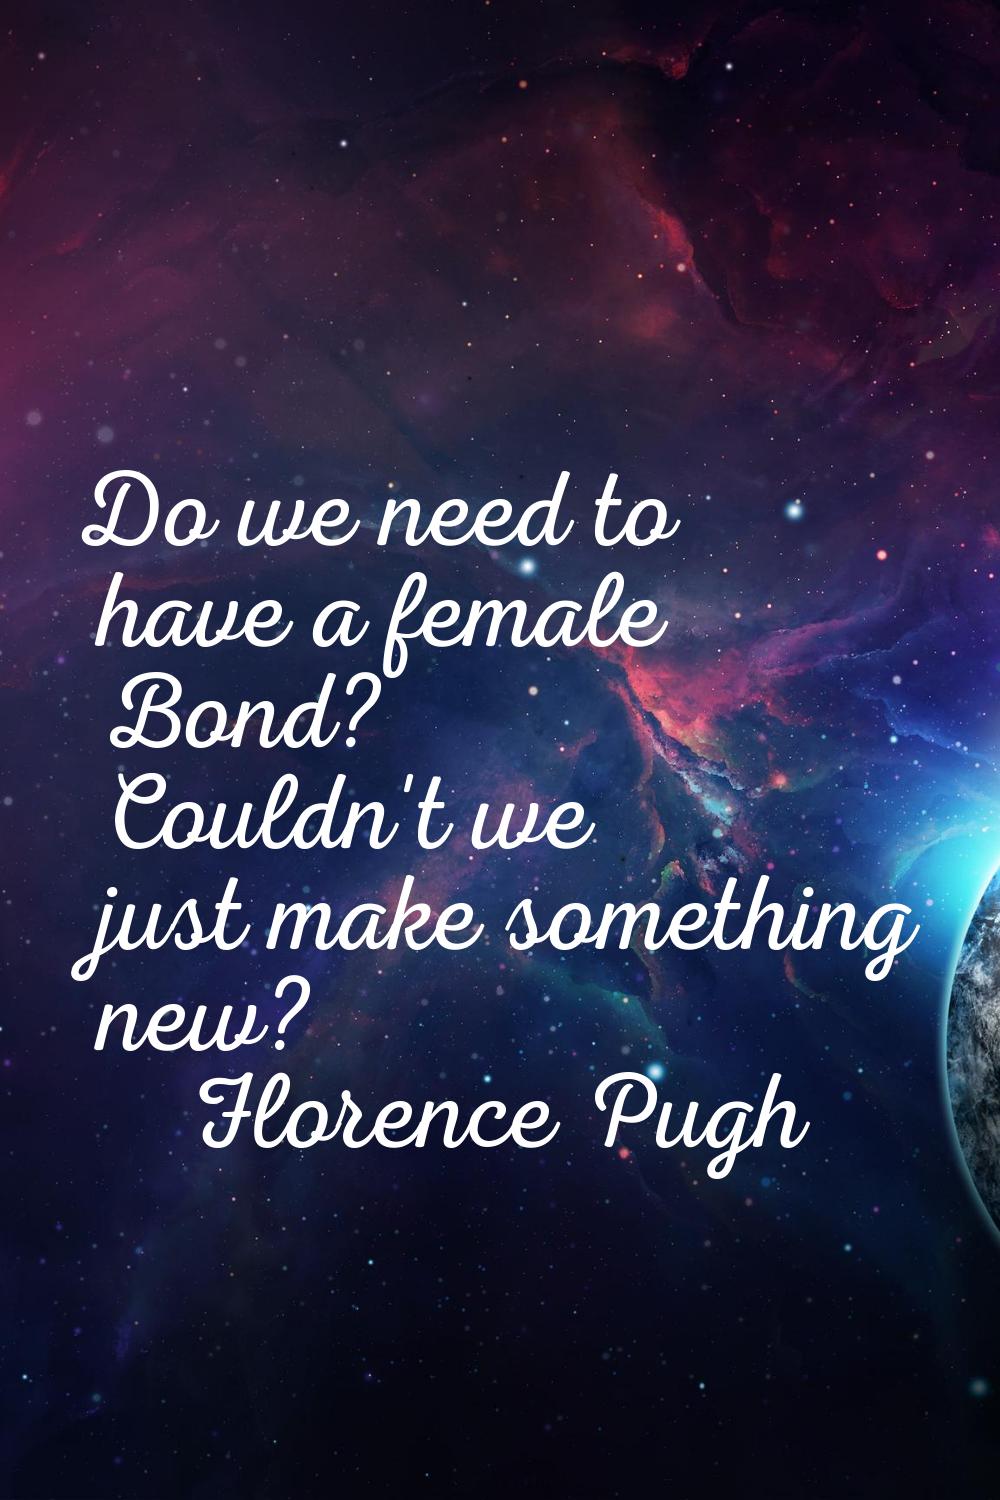 Do we need to have a female Bond? Couldn't we just make something new?